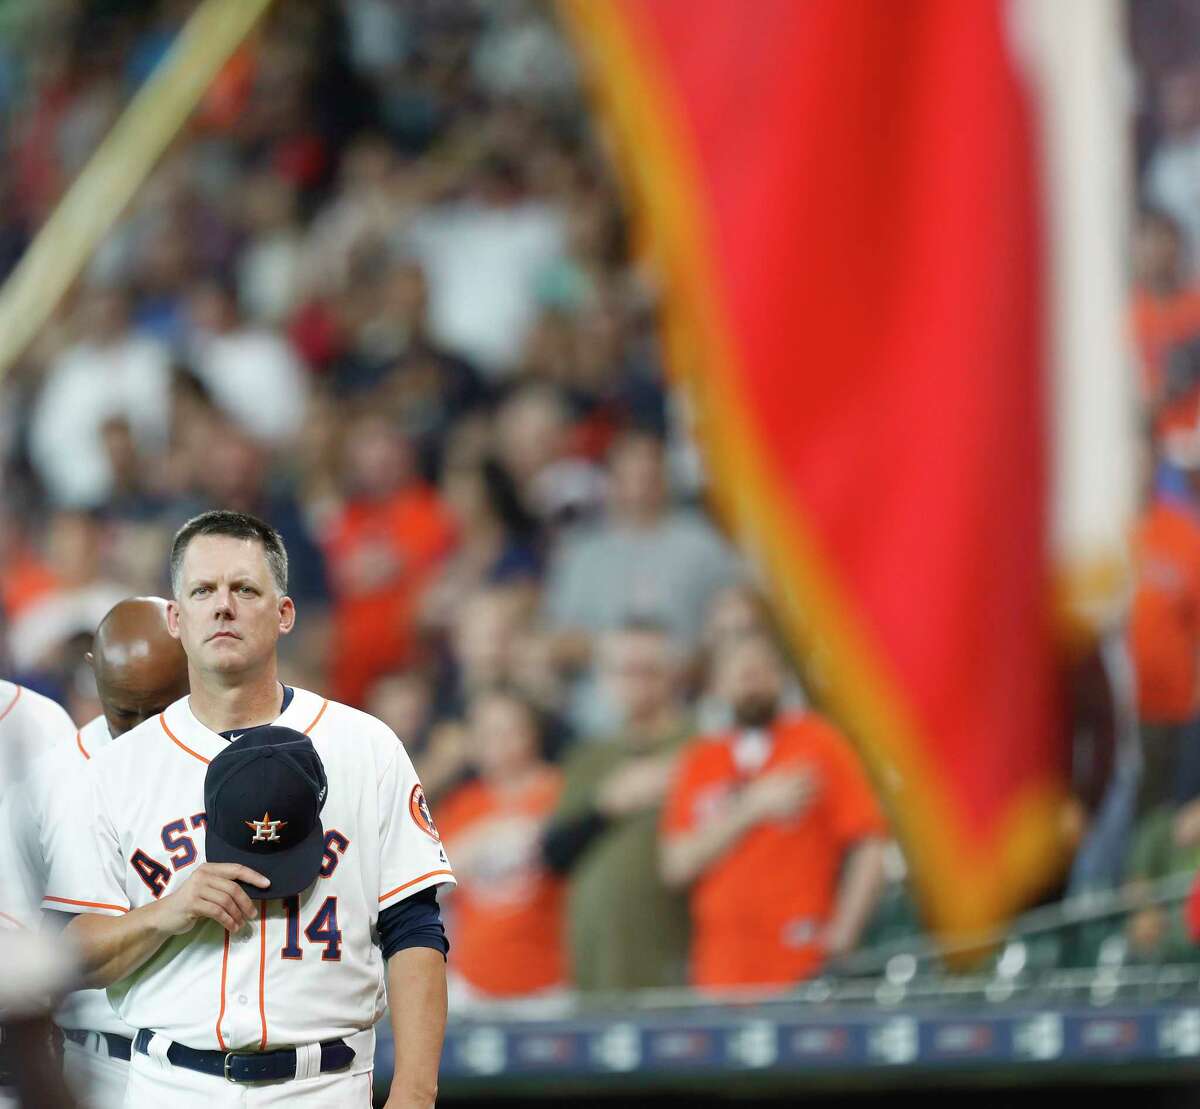 Houston Astros manager AJ Hinch (14) during the National Anthem before the start of the first inning of an MLB game at Minute Maid Park, Thursday, May 3, 2018, in Houston.